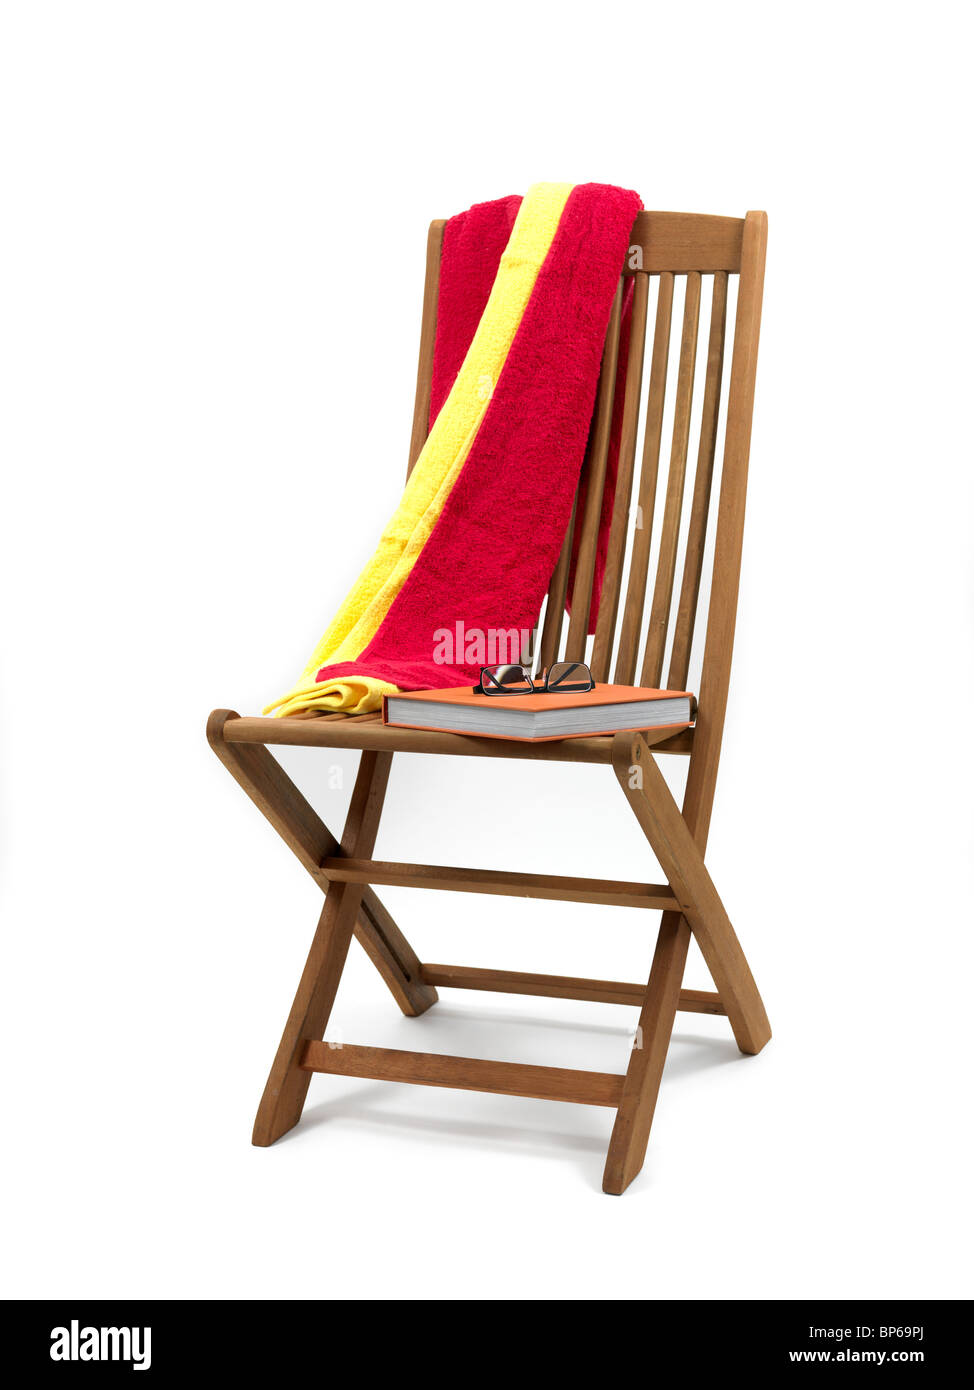 A wooden deck chair isolated against a white background Stock Photo